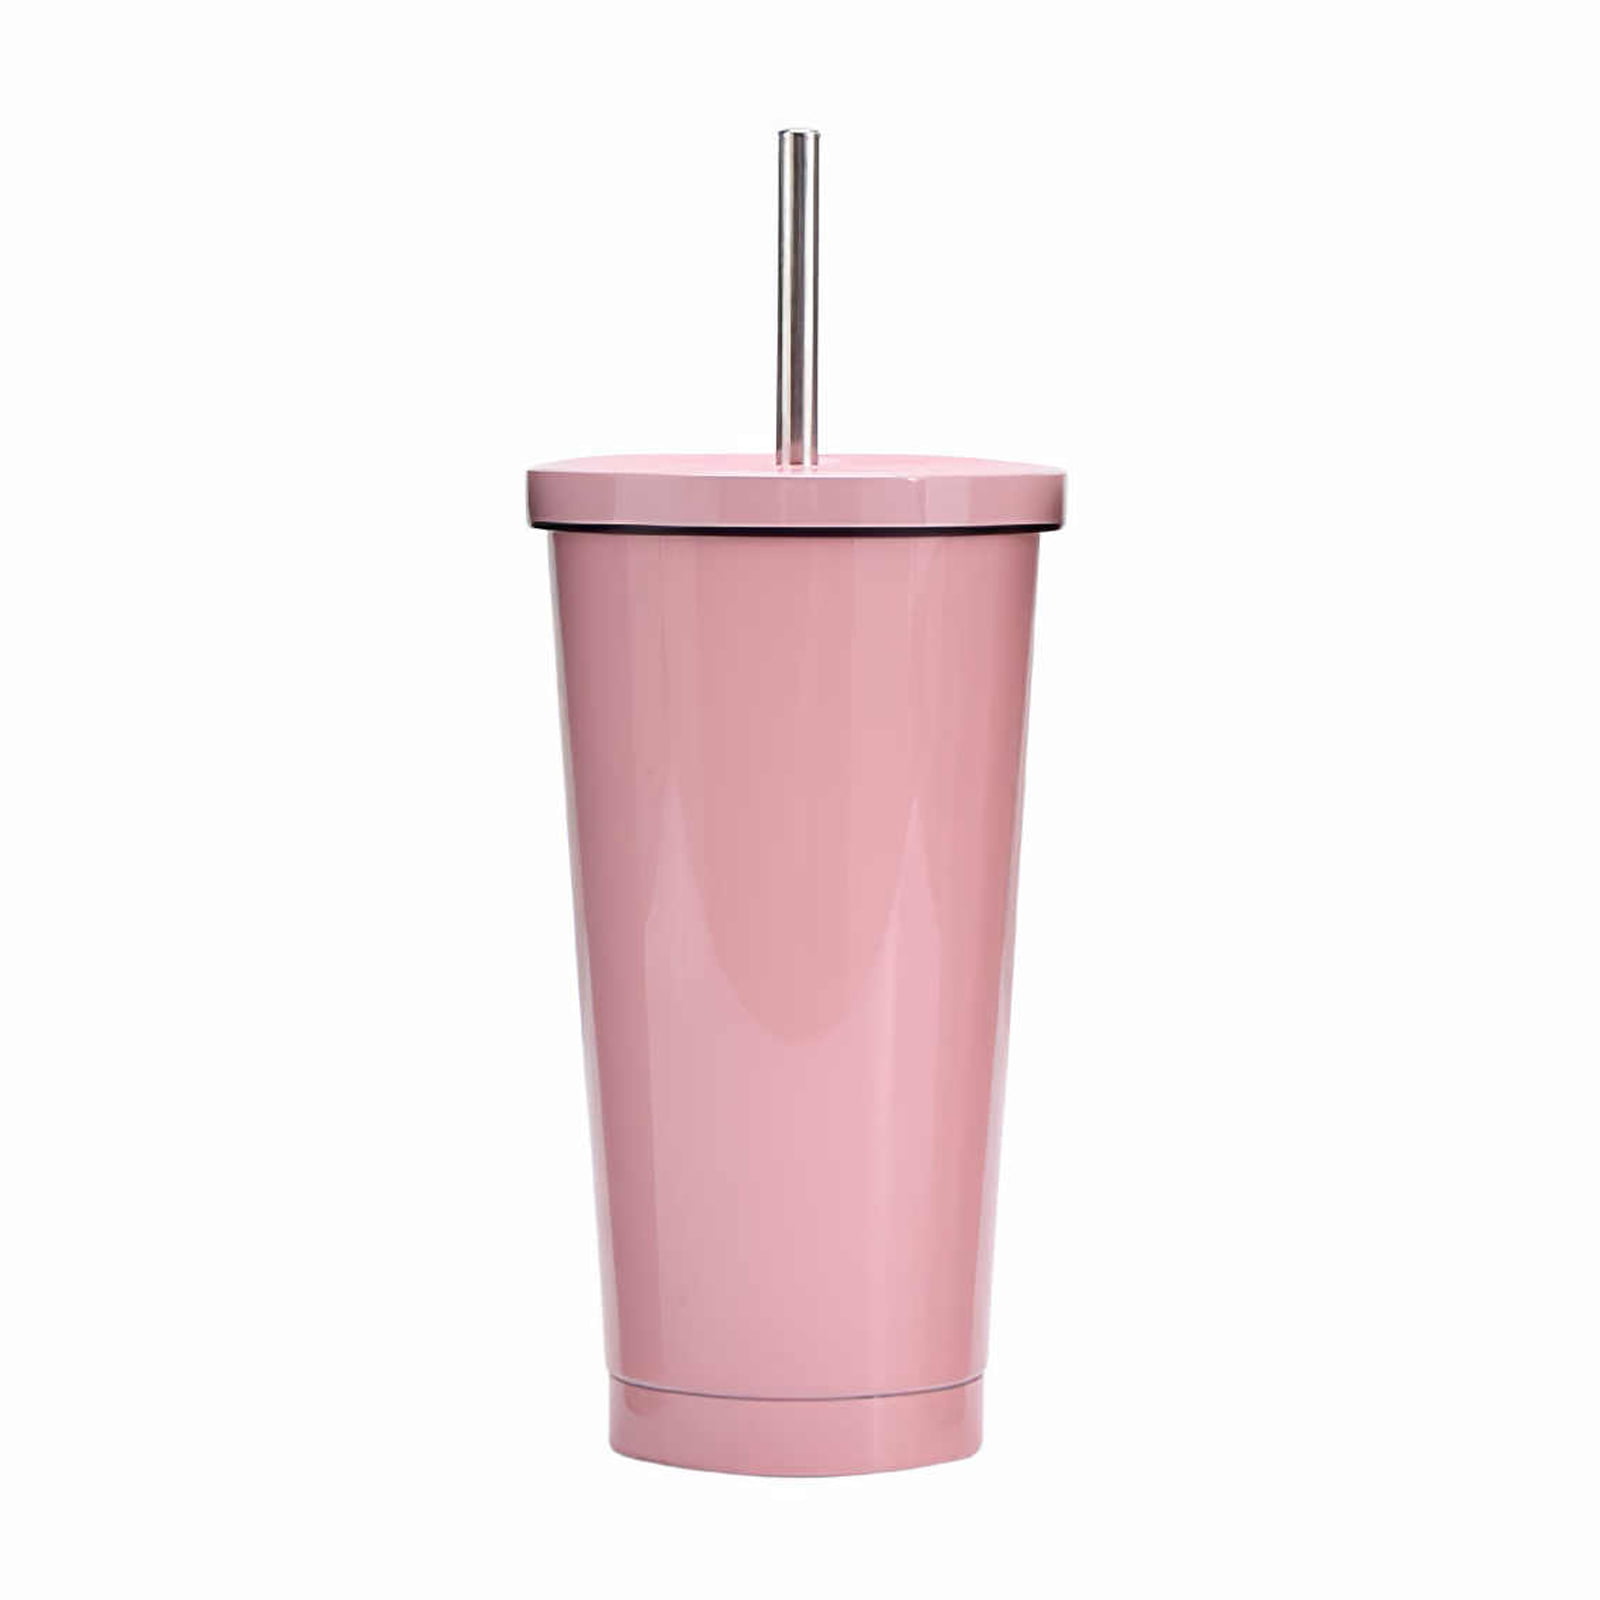 Portable Travel Mug Stainless Steel Tumbler Coffee Cup With Drinking Straw 